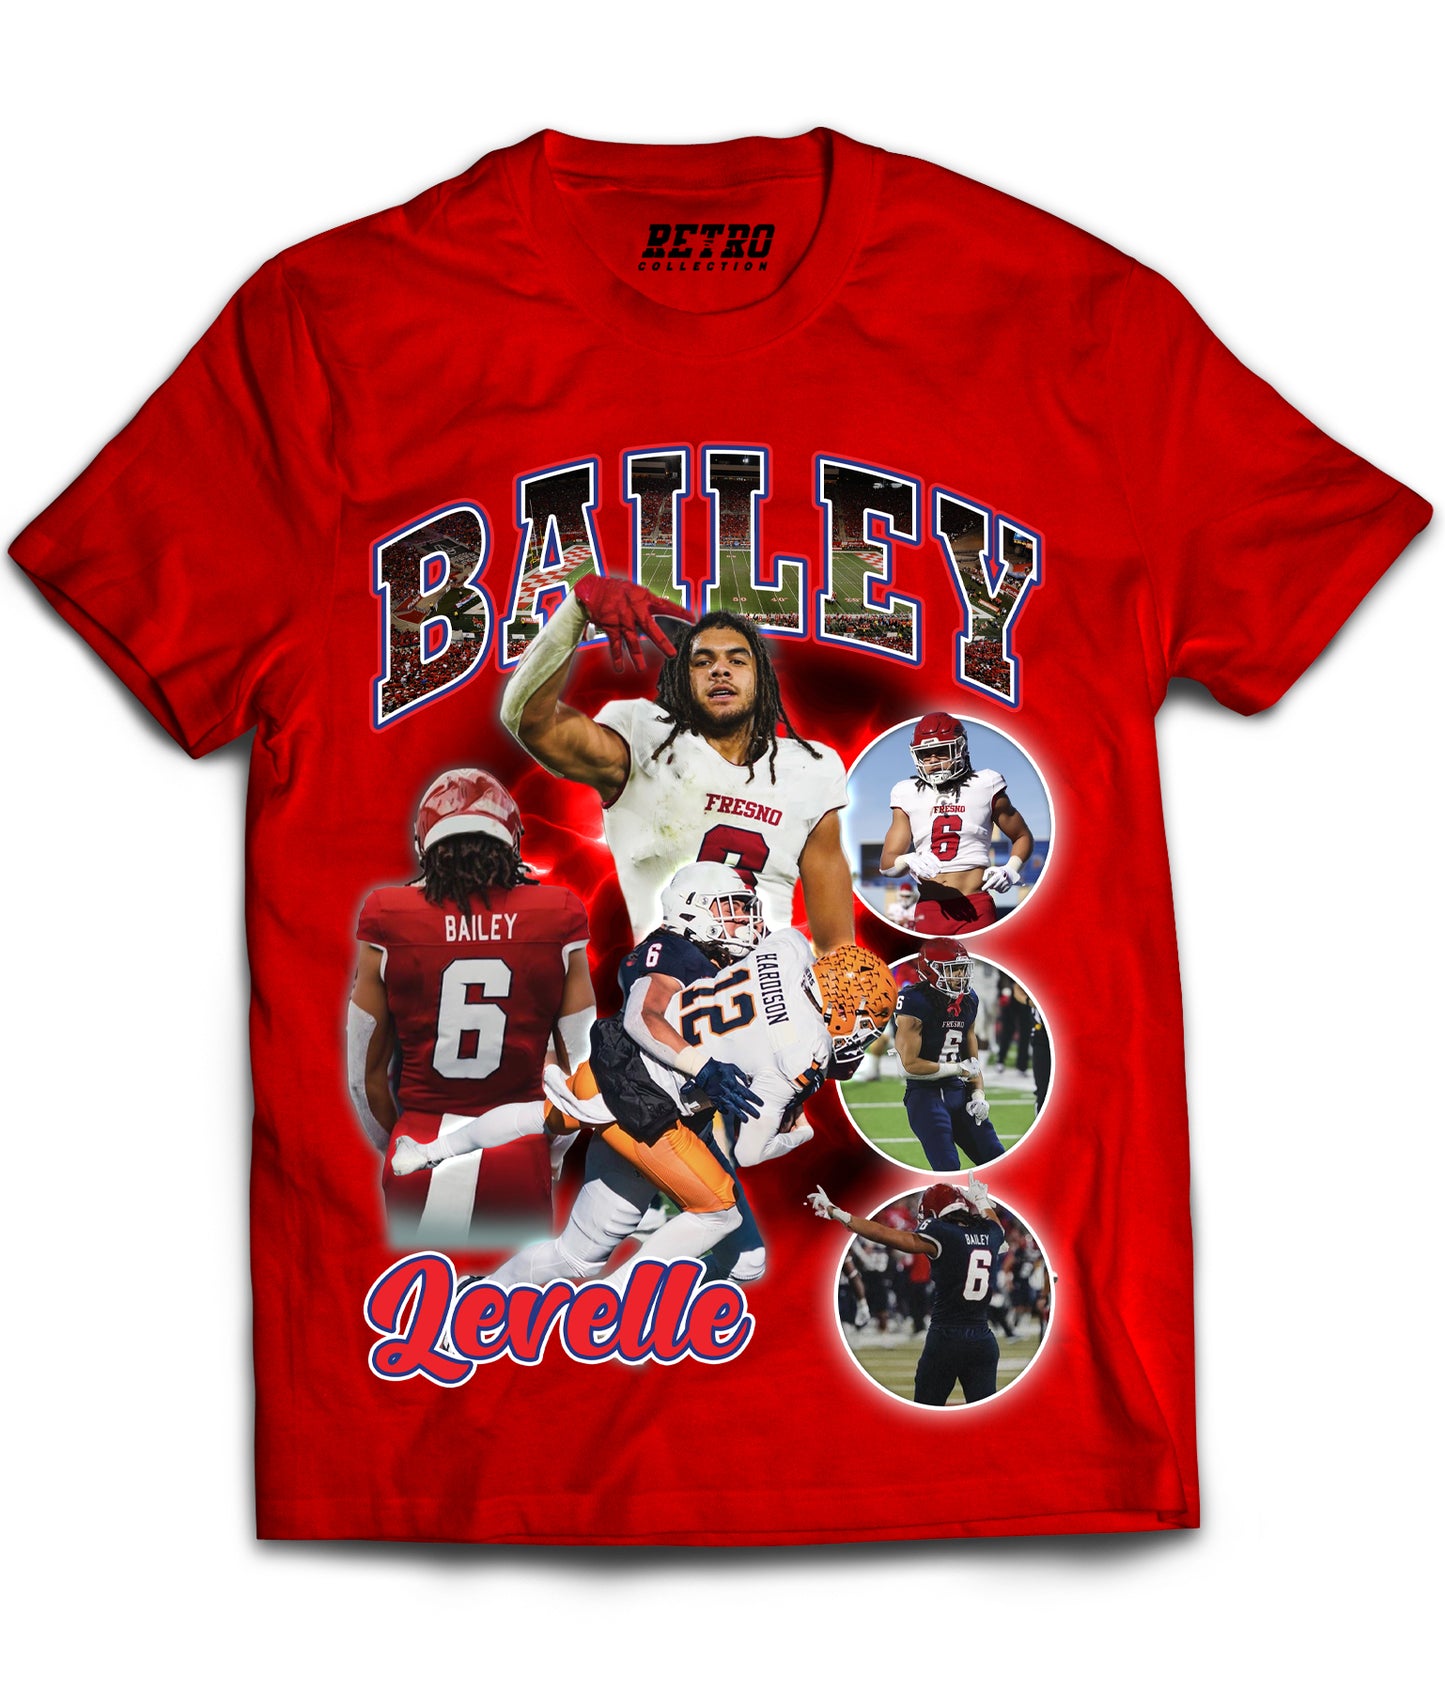 Levelle Bailey "DROP 1" Tribute Shirt *LIMITED EDITION* (Black, Red, White)